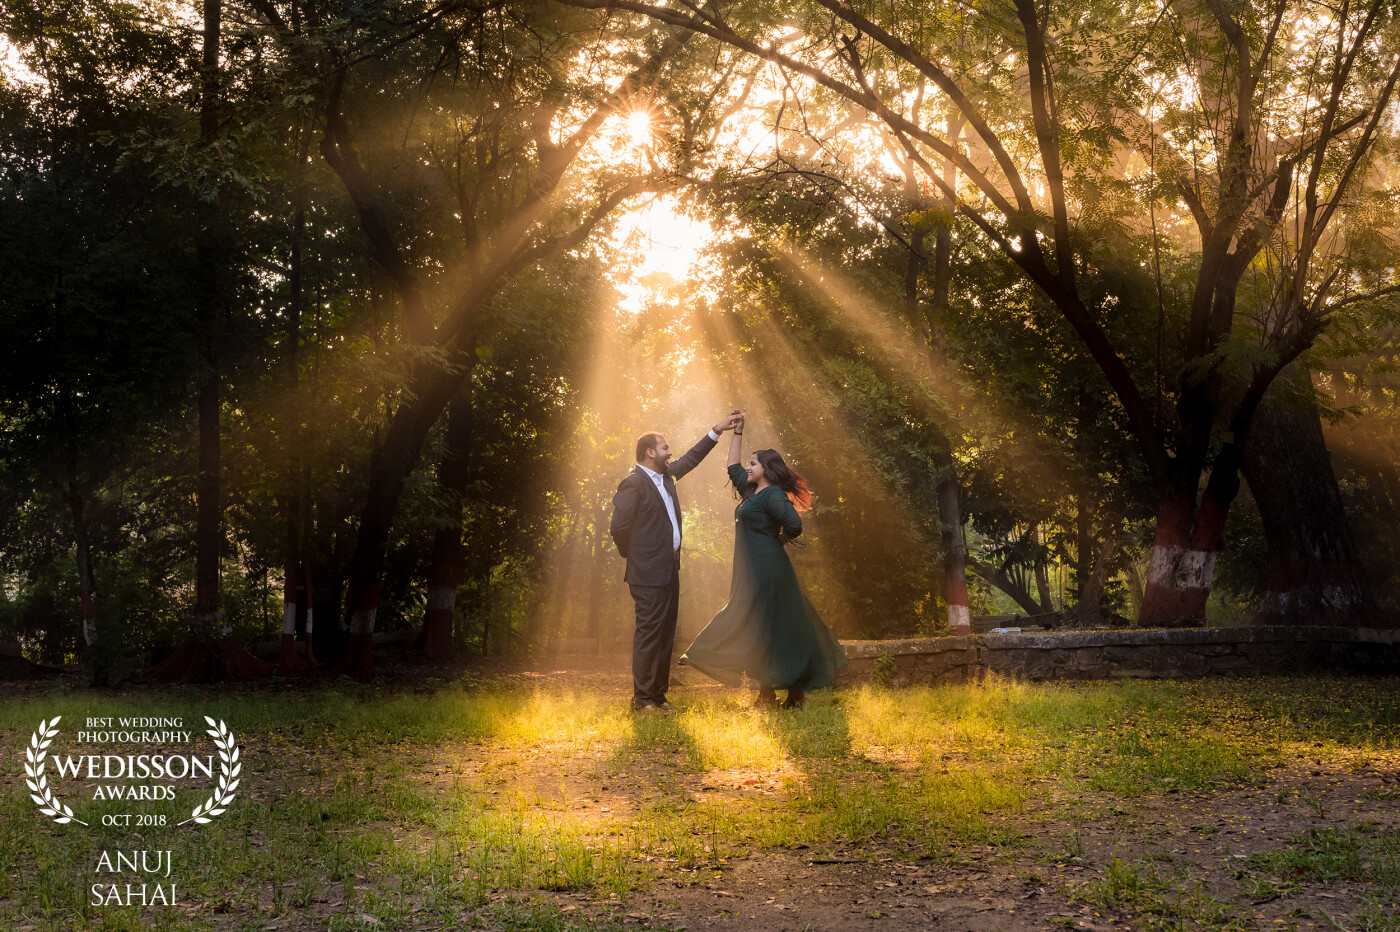 In India, one of the biggest challenge is to find a good place without people. I went with the couple early in the morning to a park with the same intention. When we started the shoot at 730am, the park was lit by beautiful golden light of the rising sun. As I was photographing the couple, I saw this beautiful sunlight light peeking through the trees and immediately i knew i have to capture a dancing pose of the couple under the sun's golden spot light!